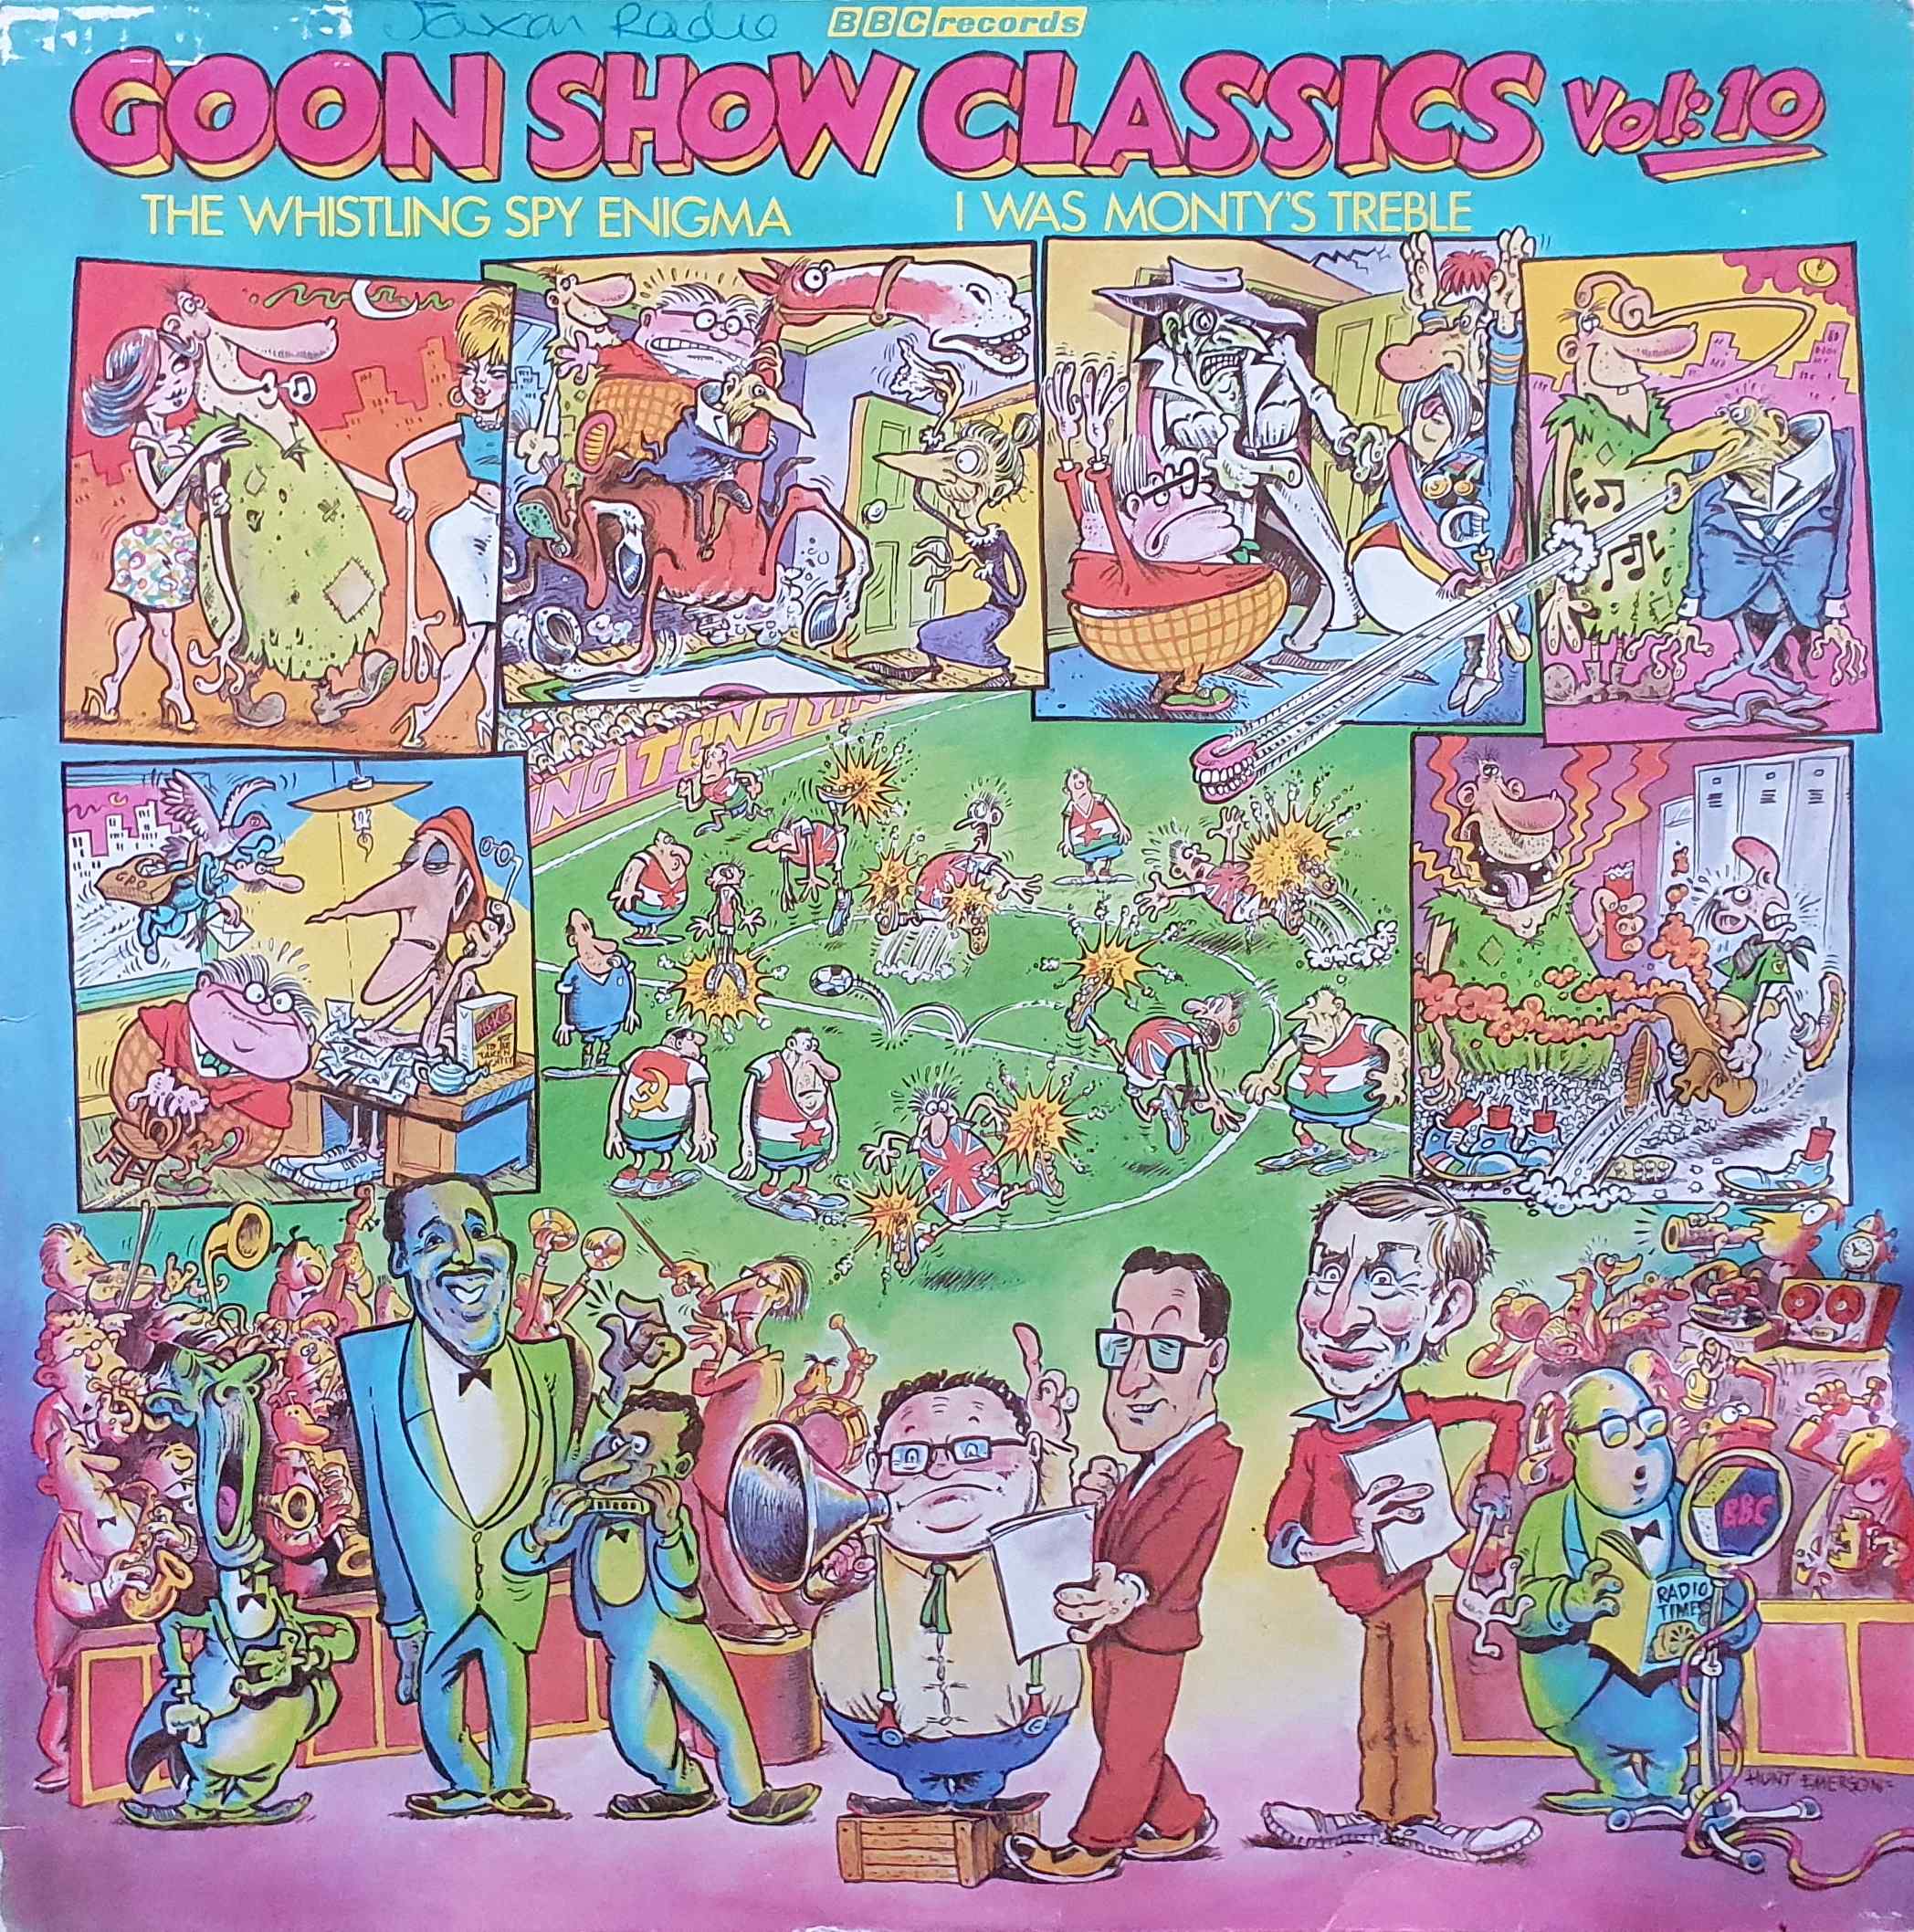 Picture of REB 481 Goon show classics - Volume 10 by artist Spike Milligan from the BBC albums - Records and Tapes library